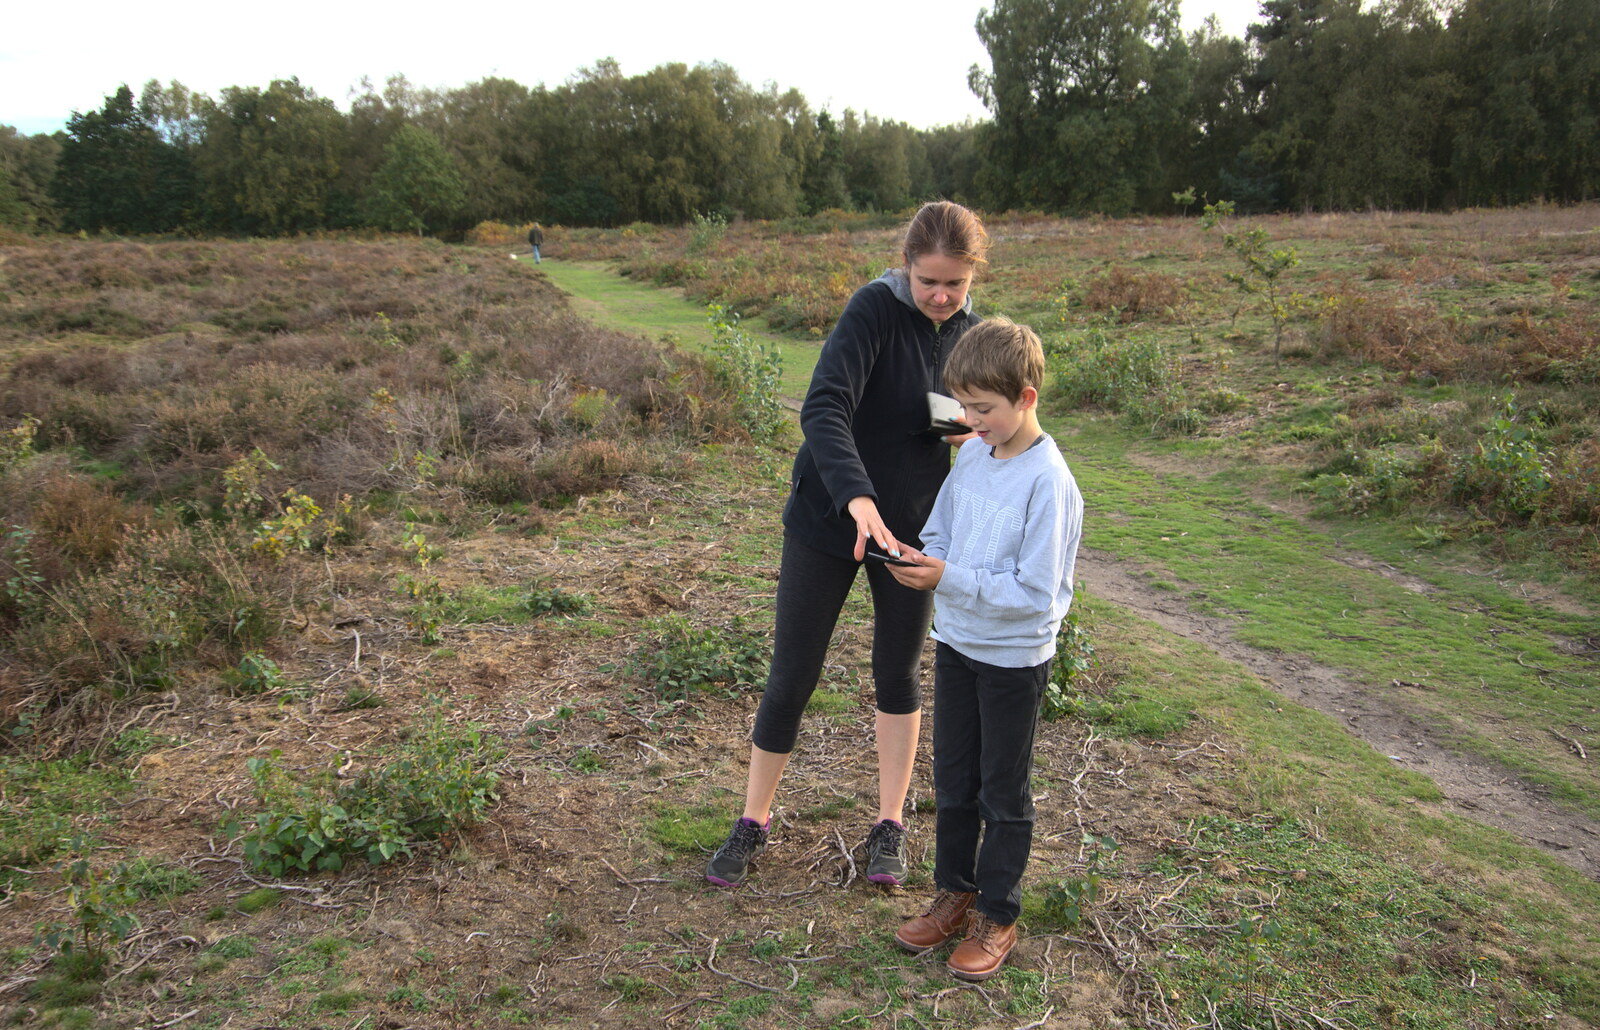 Fred reads the map from Evidence of Autumn: Geocaching on Knettishall Heath, Suffolk - 7th October 2018